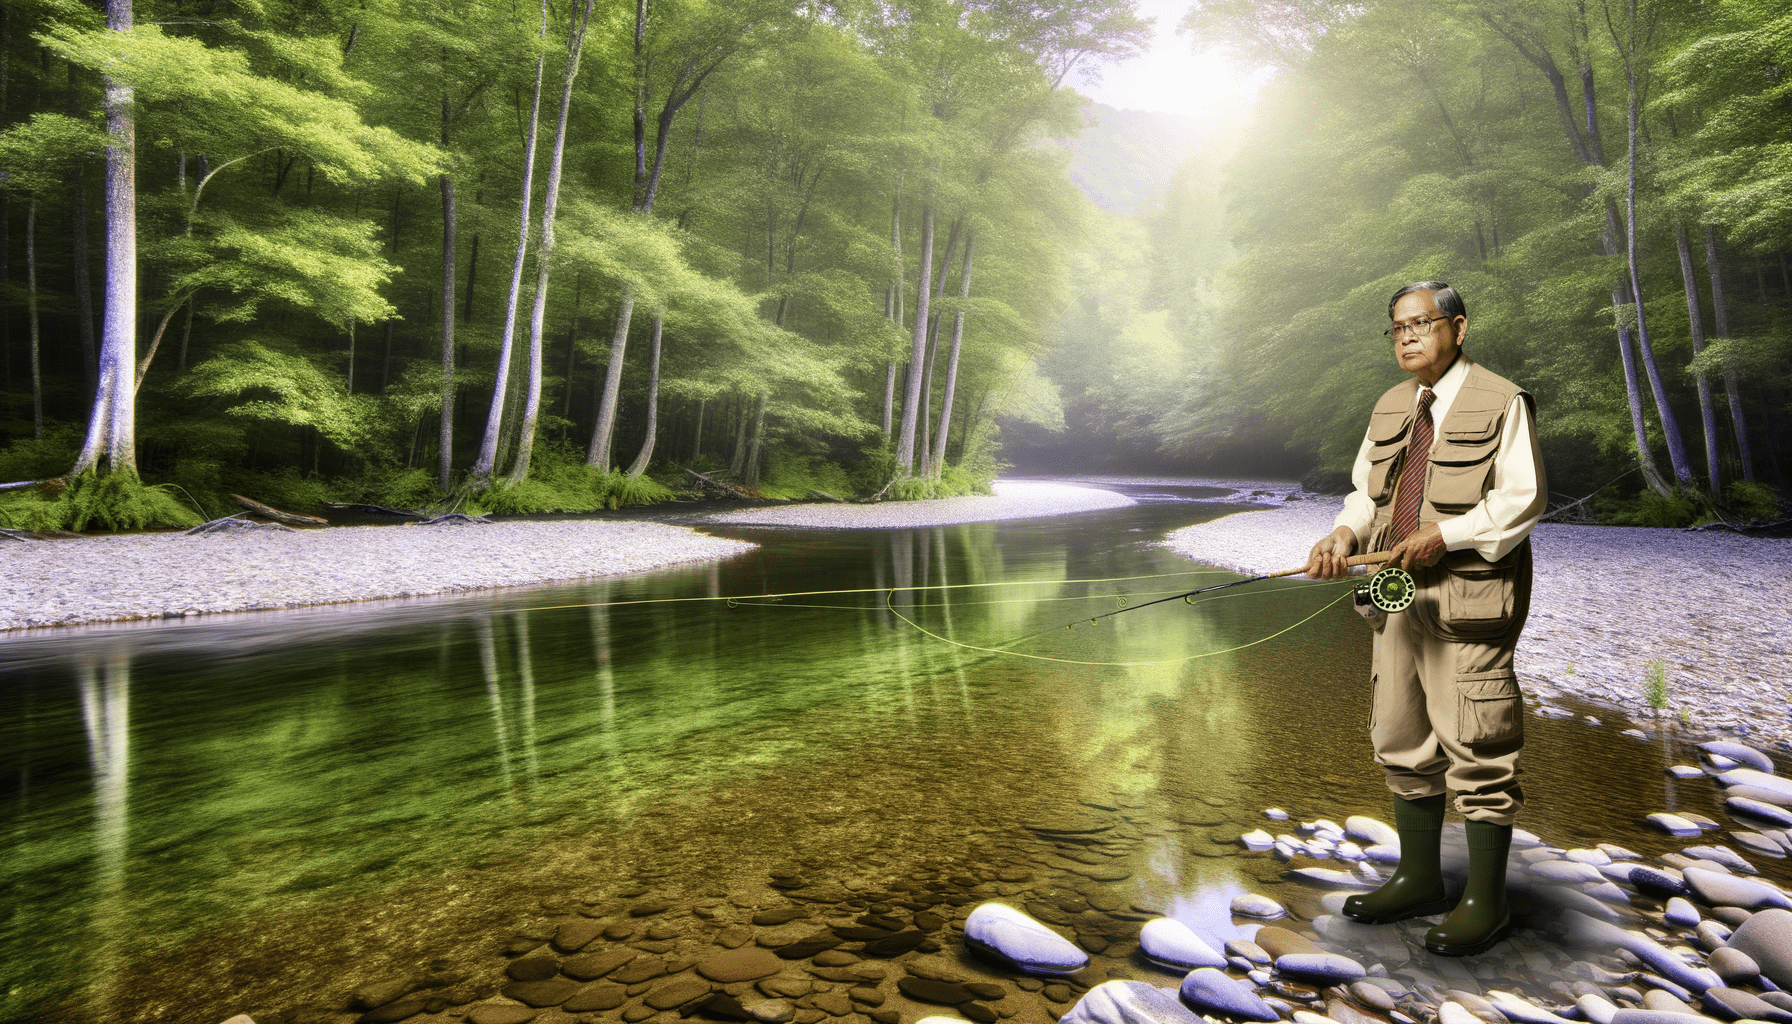 Fly Fishing for Relaxation: A Senior’s Guide to the Great Outdoors